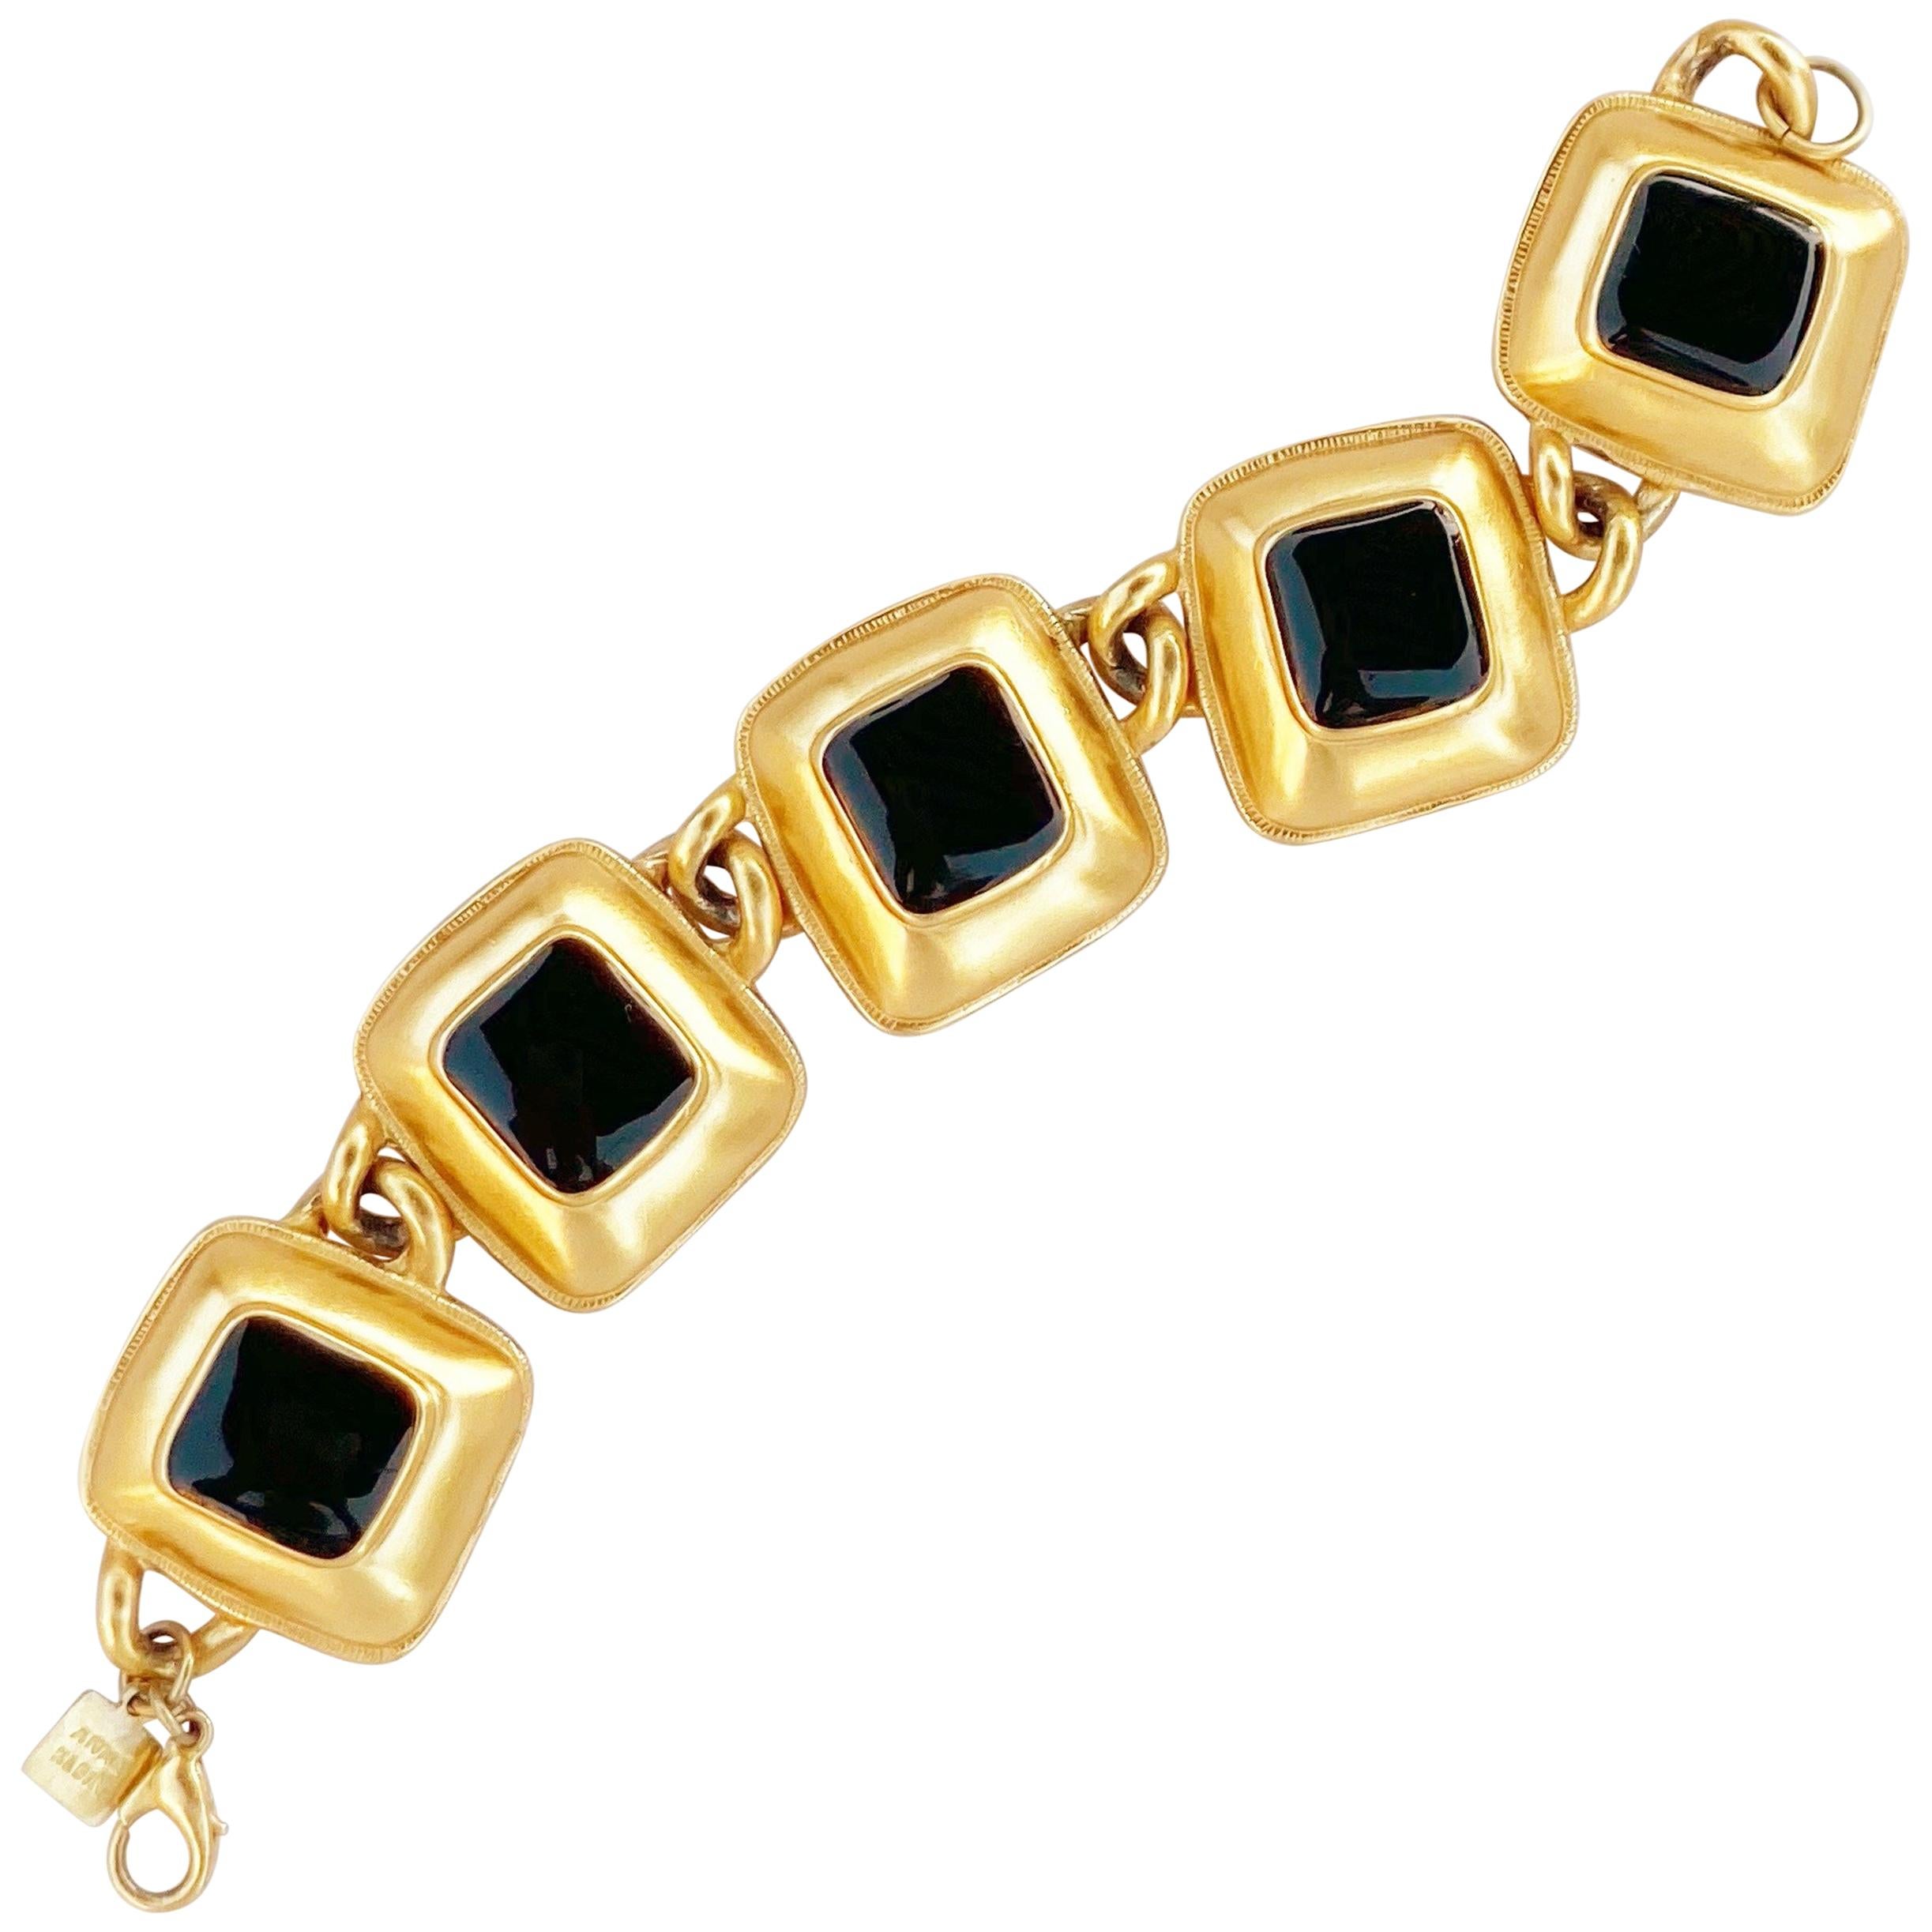 Gilded Puffy Square Link Bracelet with Black Enameling By Anne Klein, 1980s